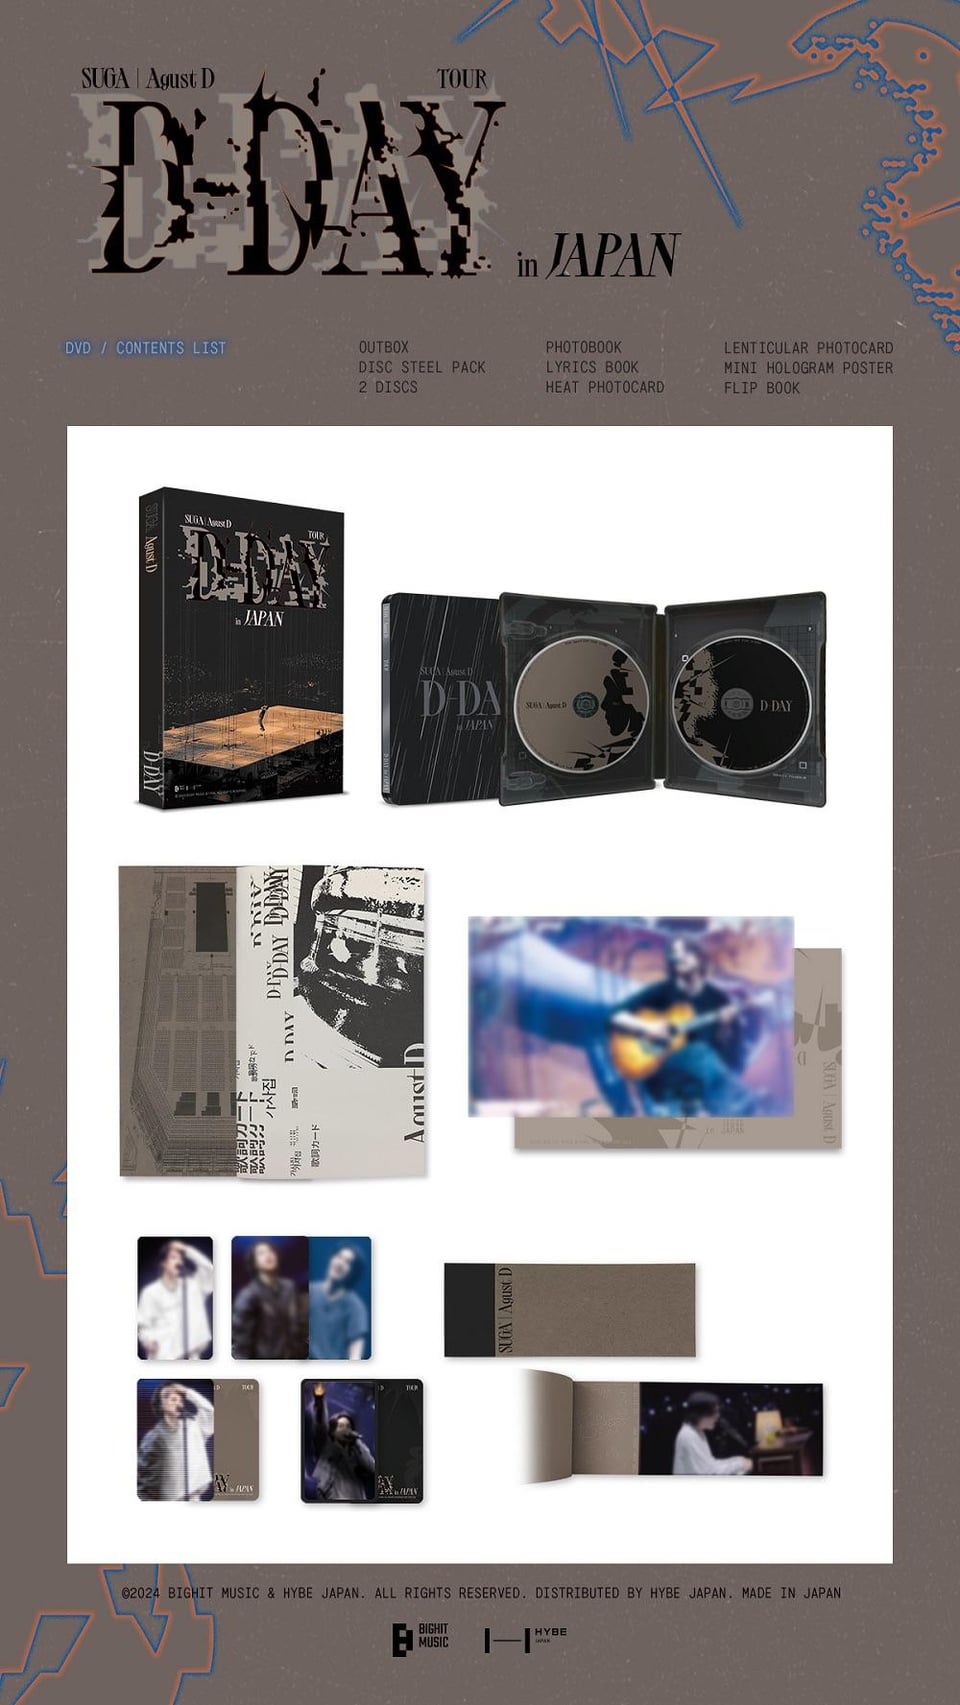 [BTS Japan Official] DVD and Blu-ray of "SUGA | Agust D TOUR 'D-DAY' in JAPAN" (Packaging Preview) - 061023